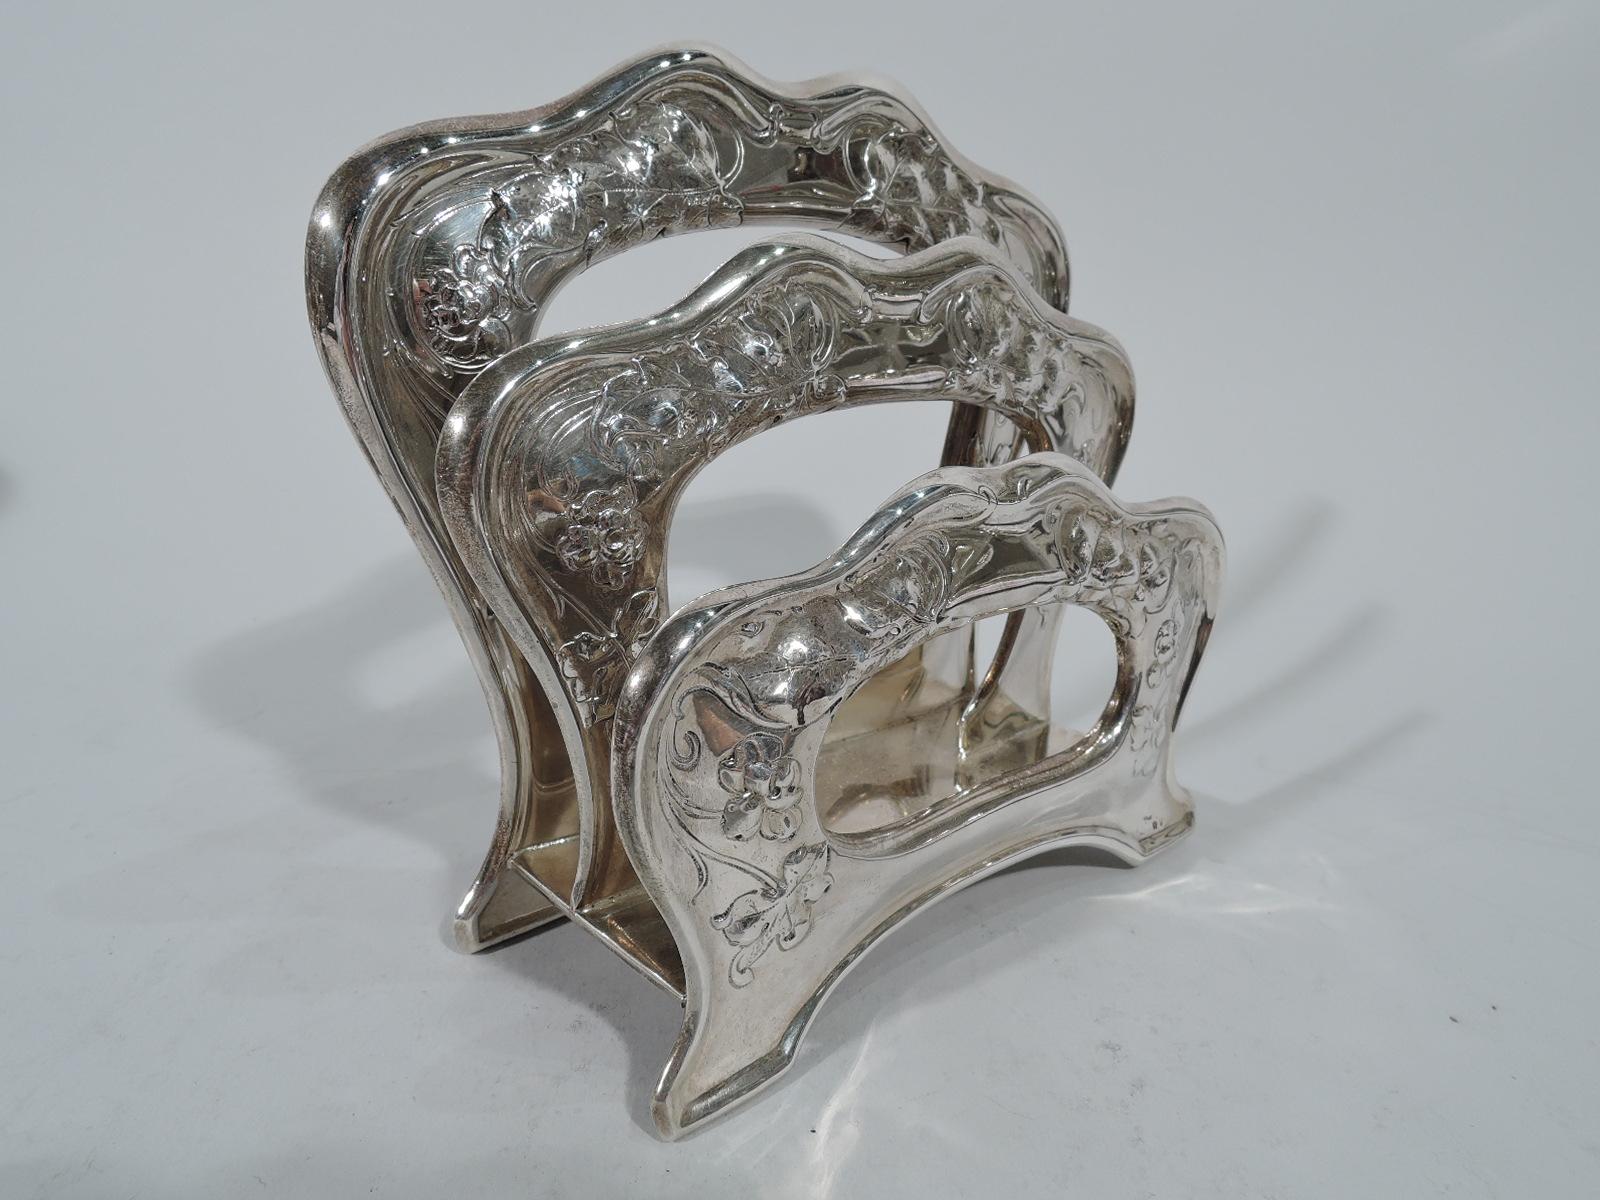 Art Nouveau sterling silver letter rack. Made by Gorham in Providence in 1901. Three shaped and open descending arches mounted to rectangular base. Front and back have bracket supports. Chased leaves and flowers. A pretty turn-of-the-century desk